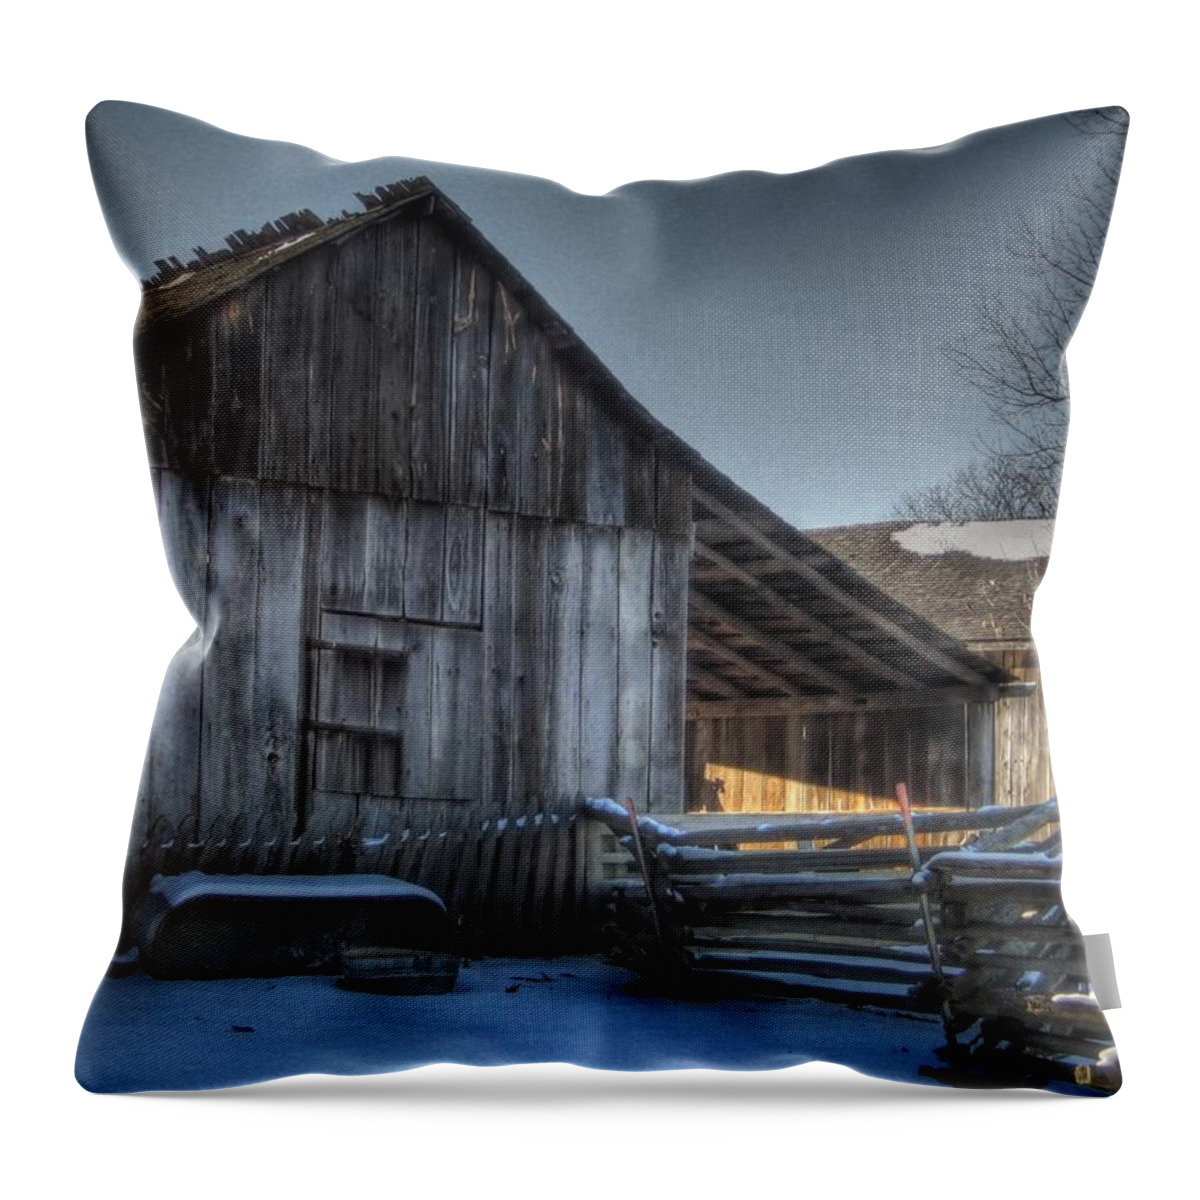 Barn Throw Pillow featuring the photograph Snowy Barn by Jane Linders